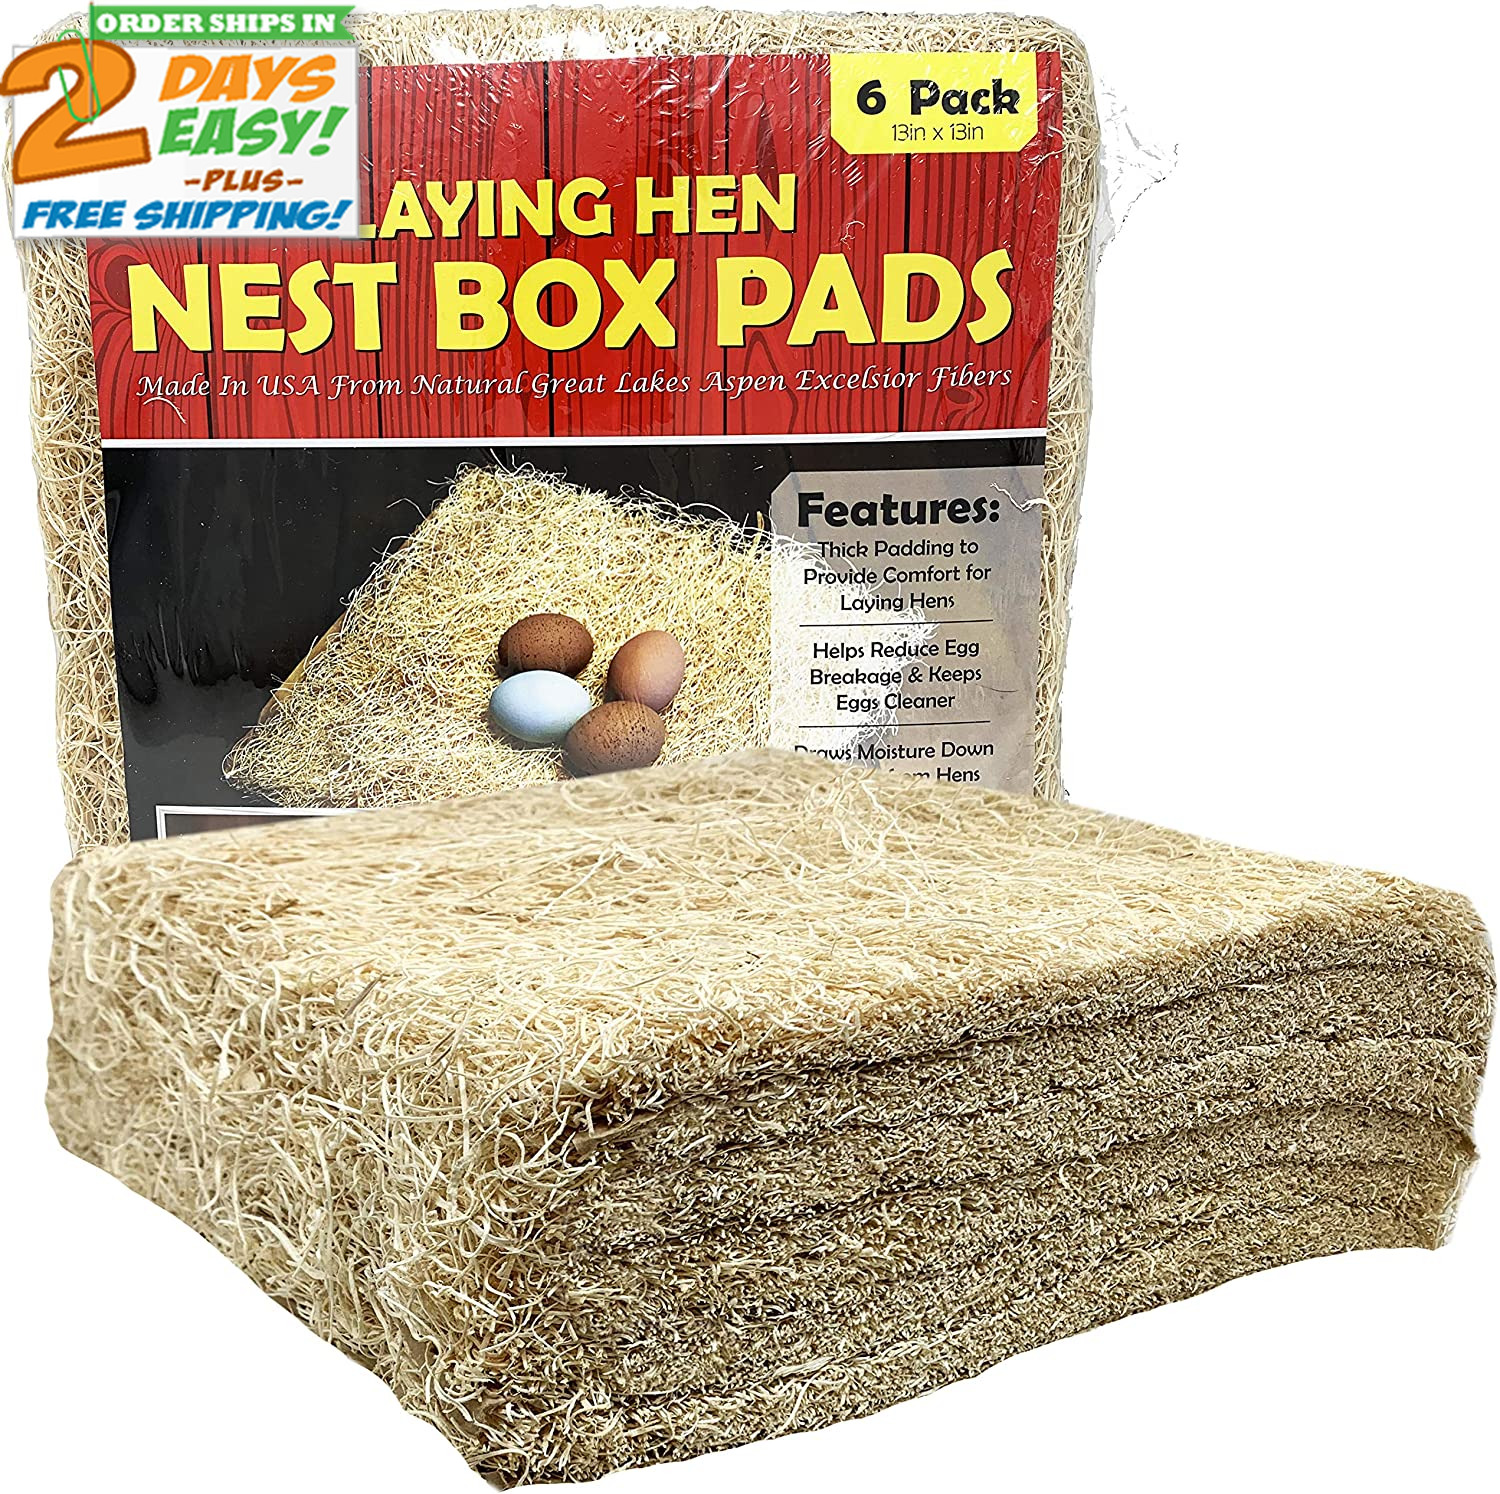 Cackle Hatchery Laying Hen Nest Box Pads - 13